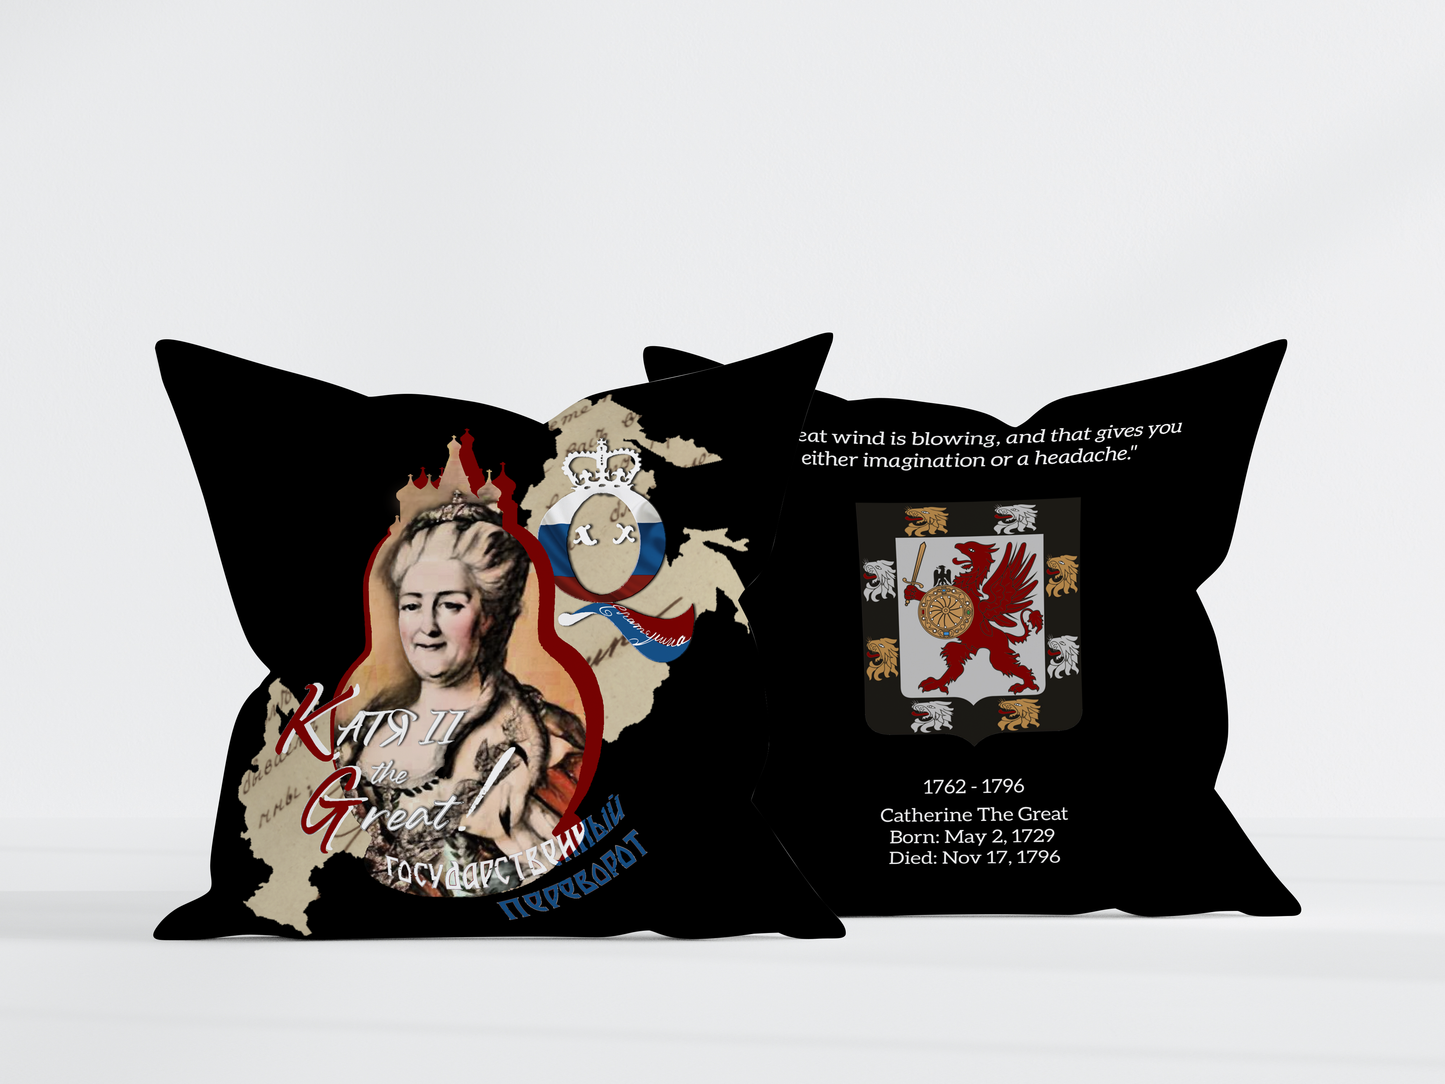 Catherine The Great Pillow Cover - Black - 22x22